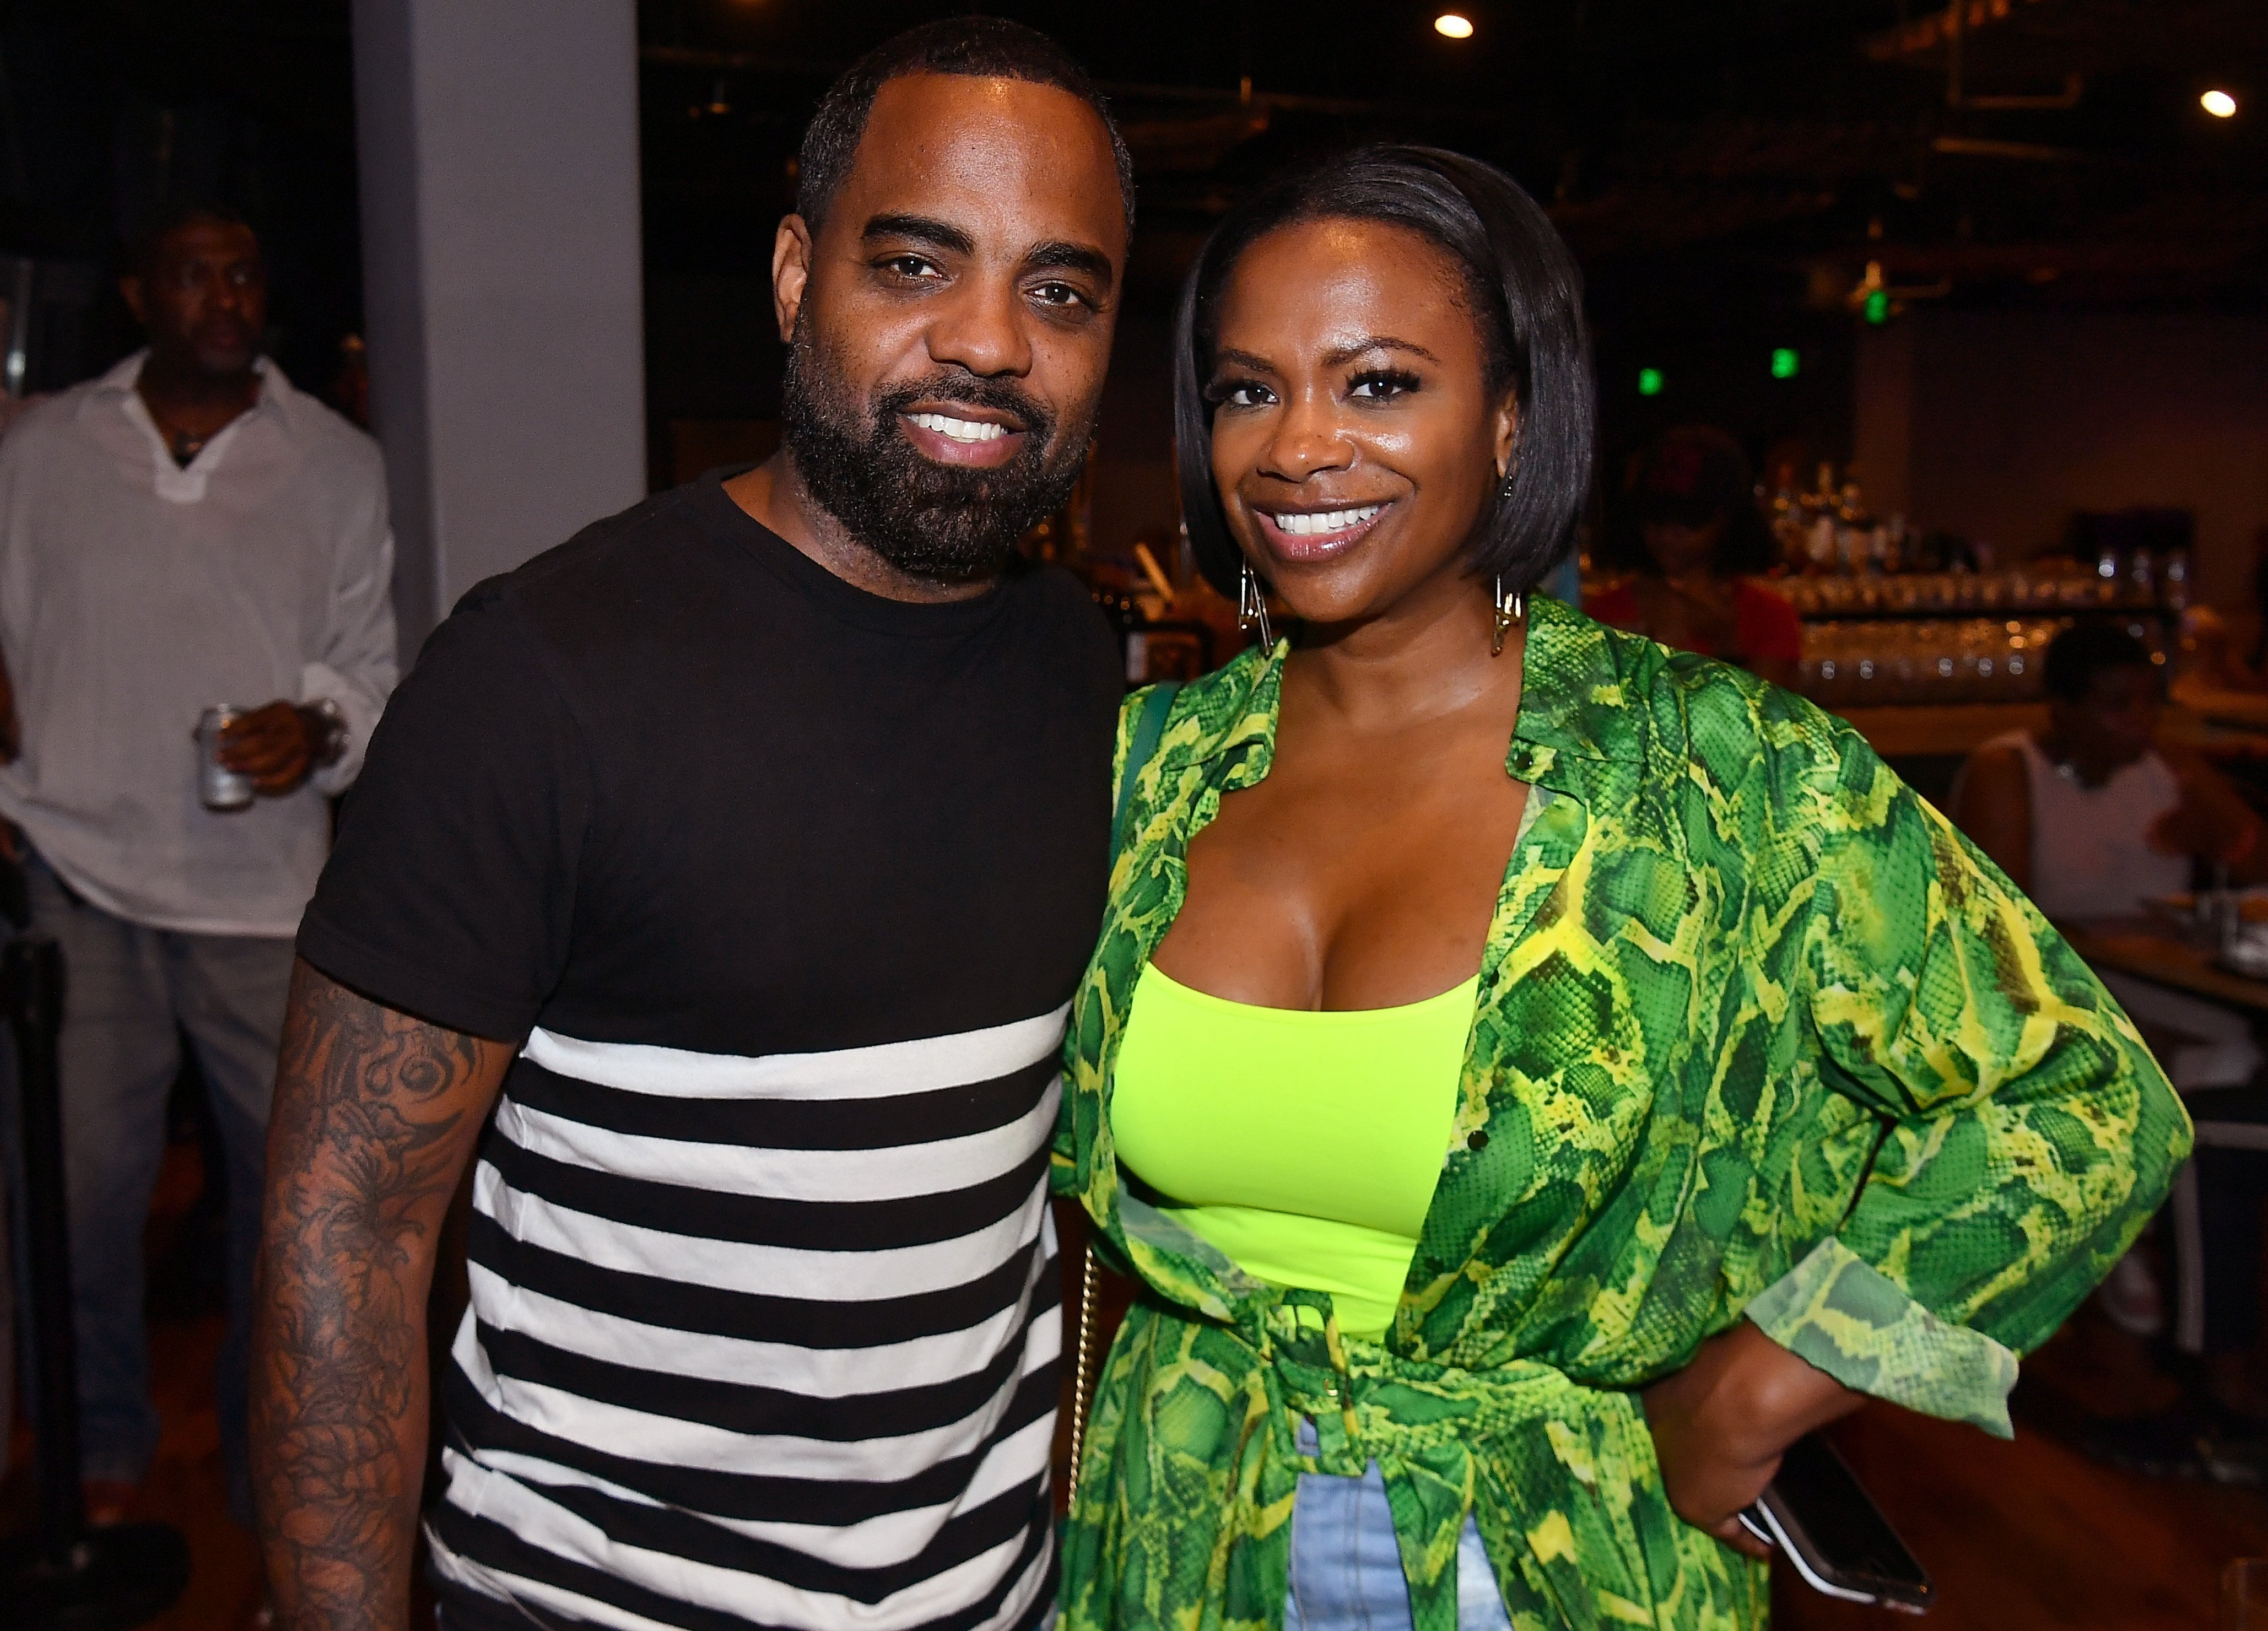 Kandi Burruss and her husband, Todd Tucker pose in a Majic 107.5 event in Atlanta in September 2019. | Photo: Getty Images